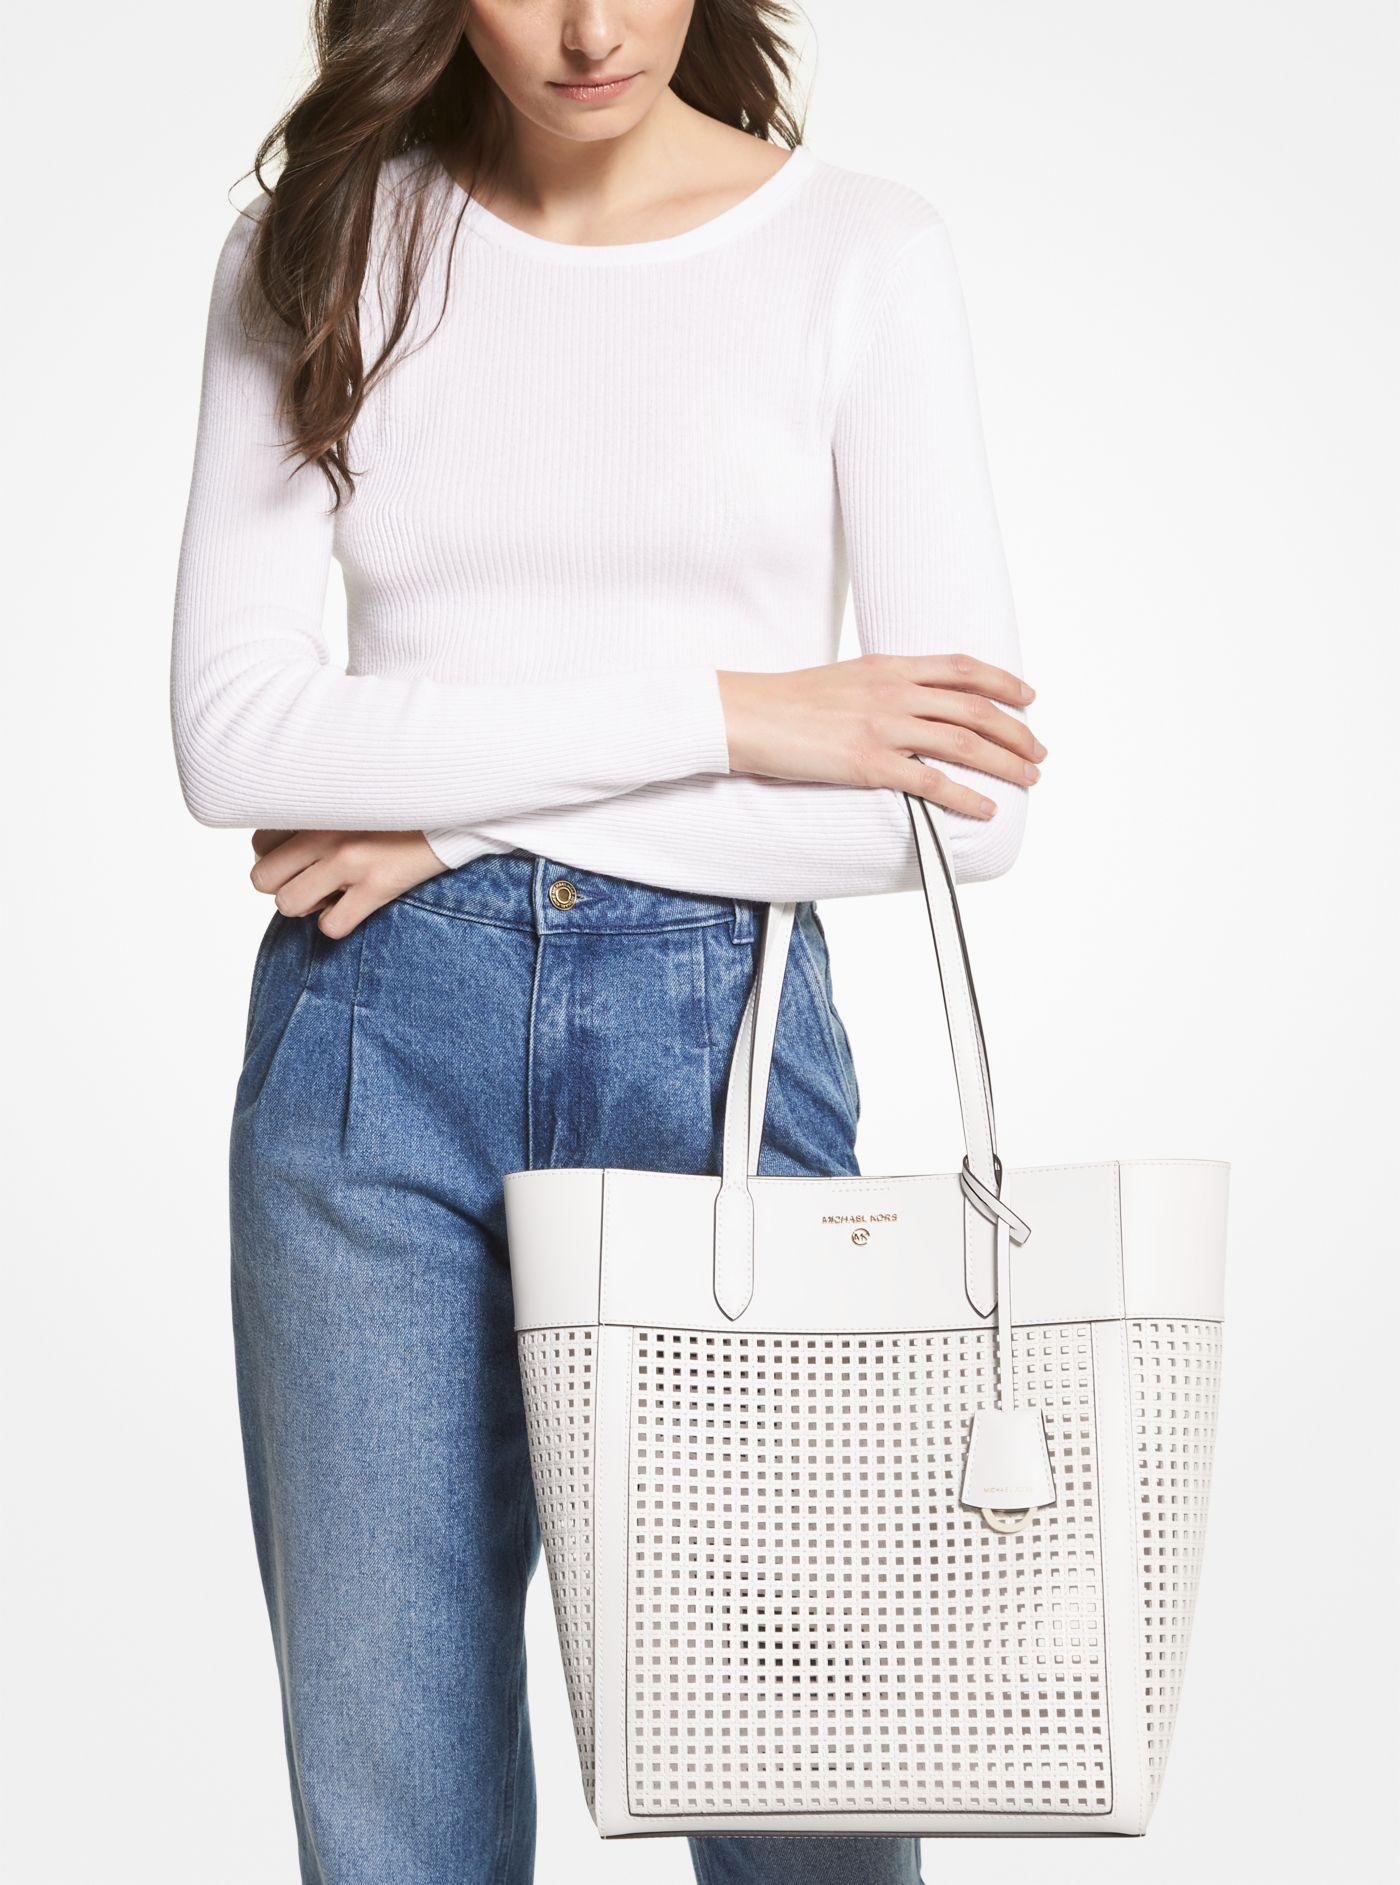 Michael Kors Sinclair Large Perforated Leather Tote Bag in White | Lyst